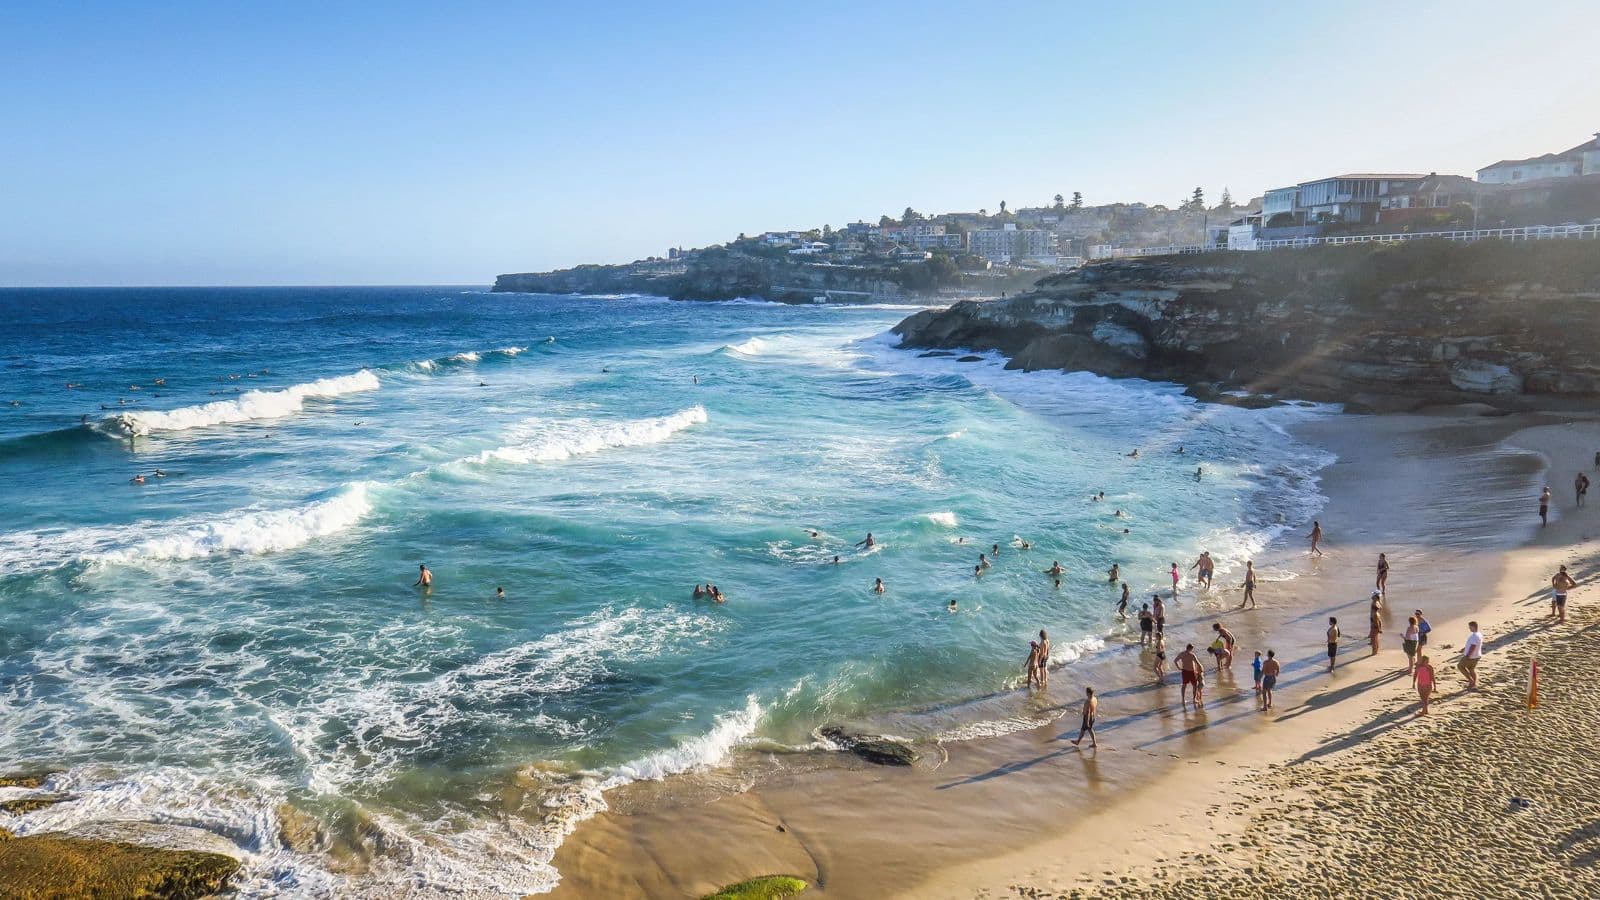 Explore Sydney's coastal beach wonders with this guide